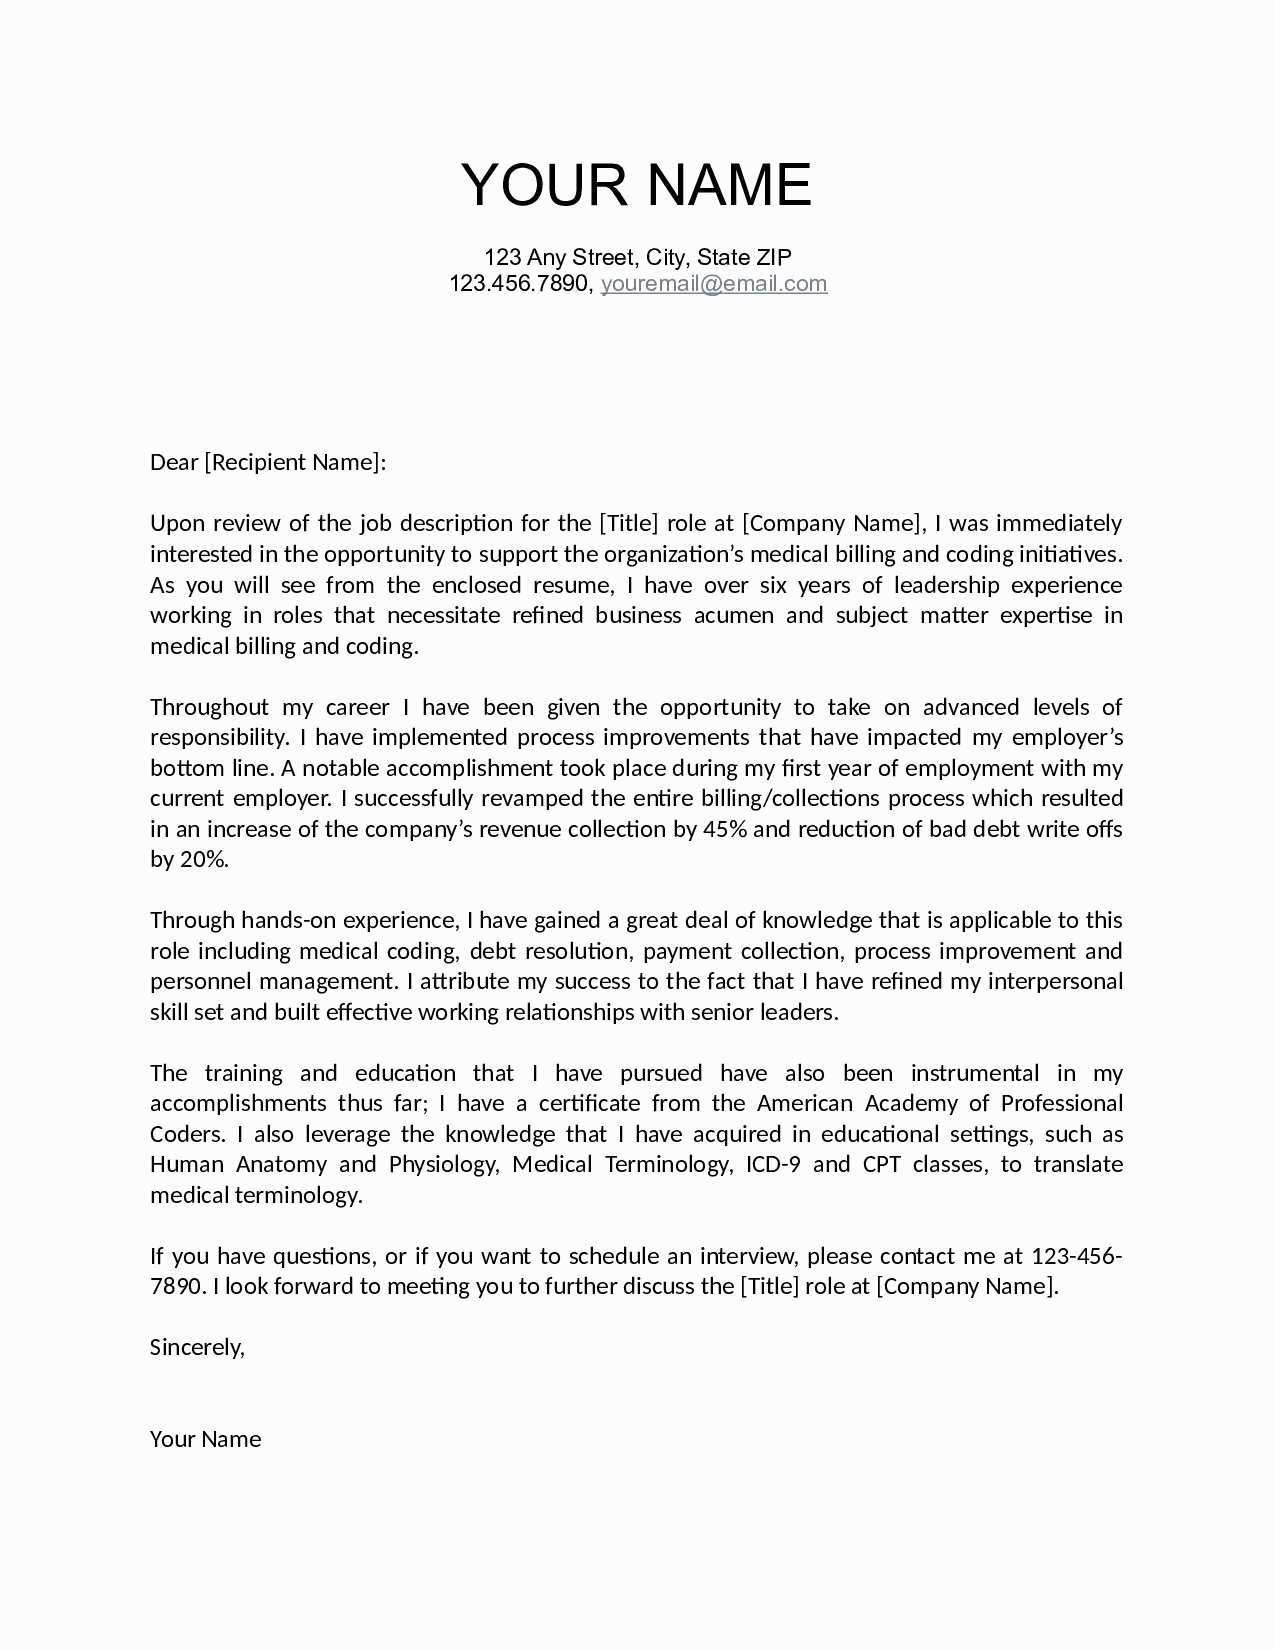 Recruitment Letter Template - How to Write A Cover Letter for Recruitment Agency Best Job Fer